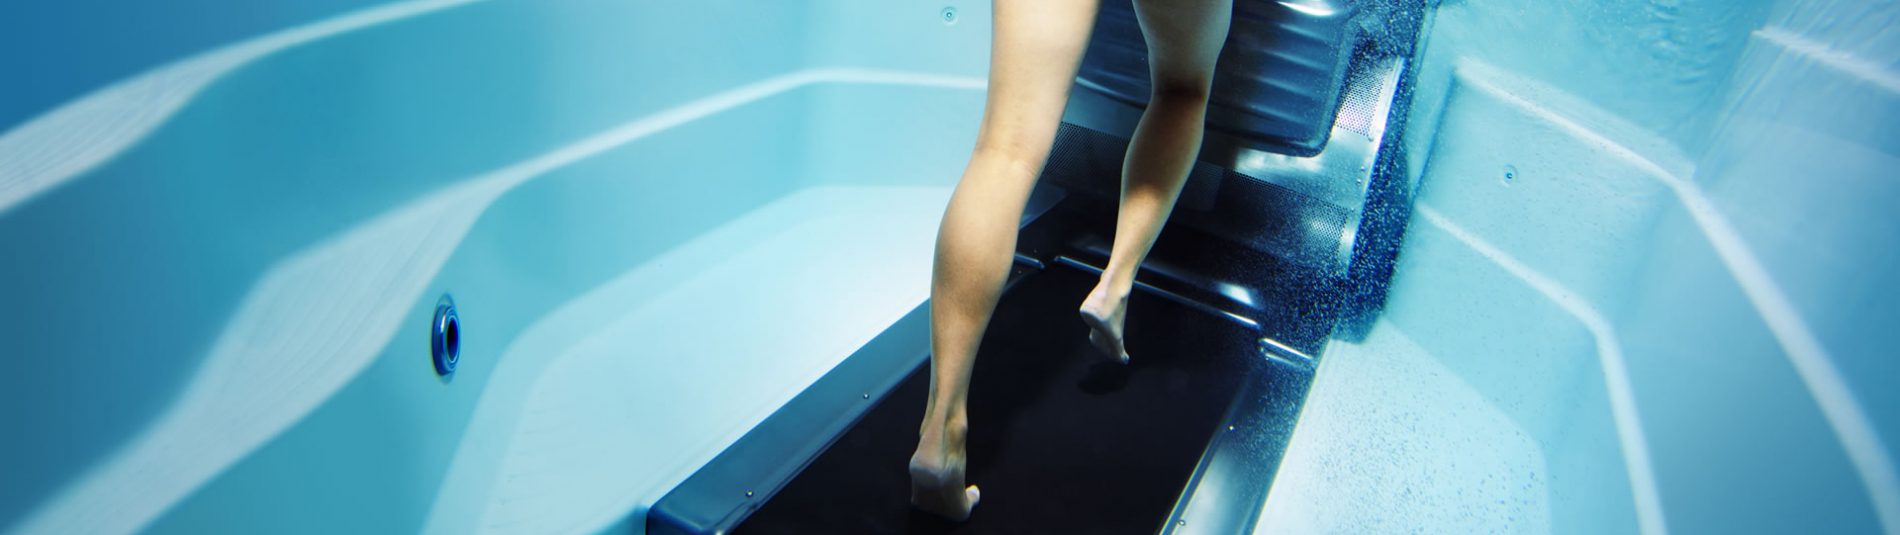 Why You Should Buy a Water Treadmill